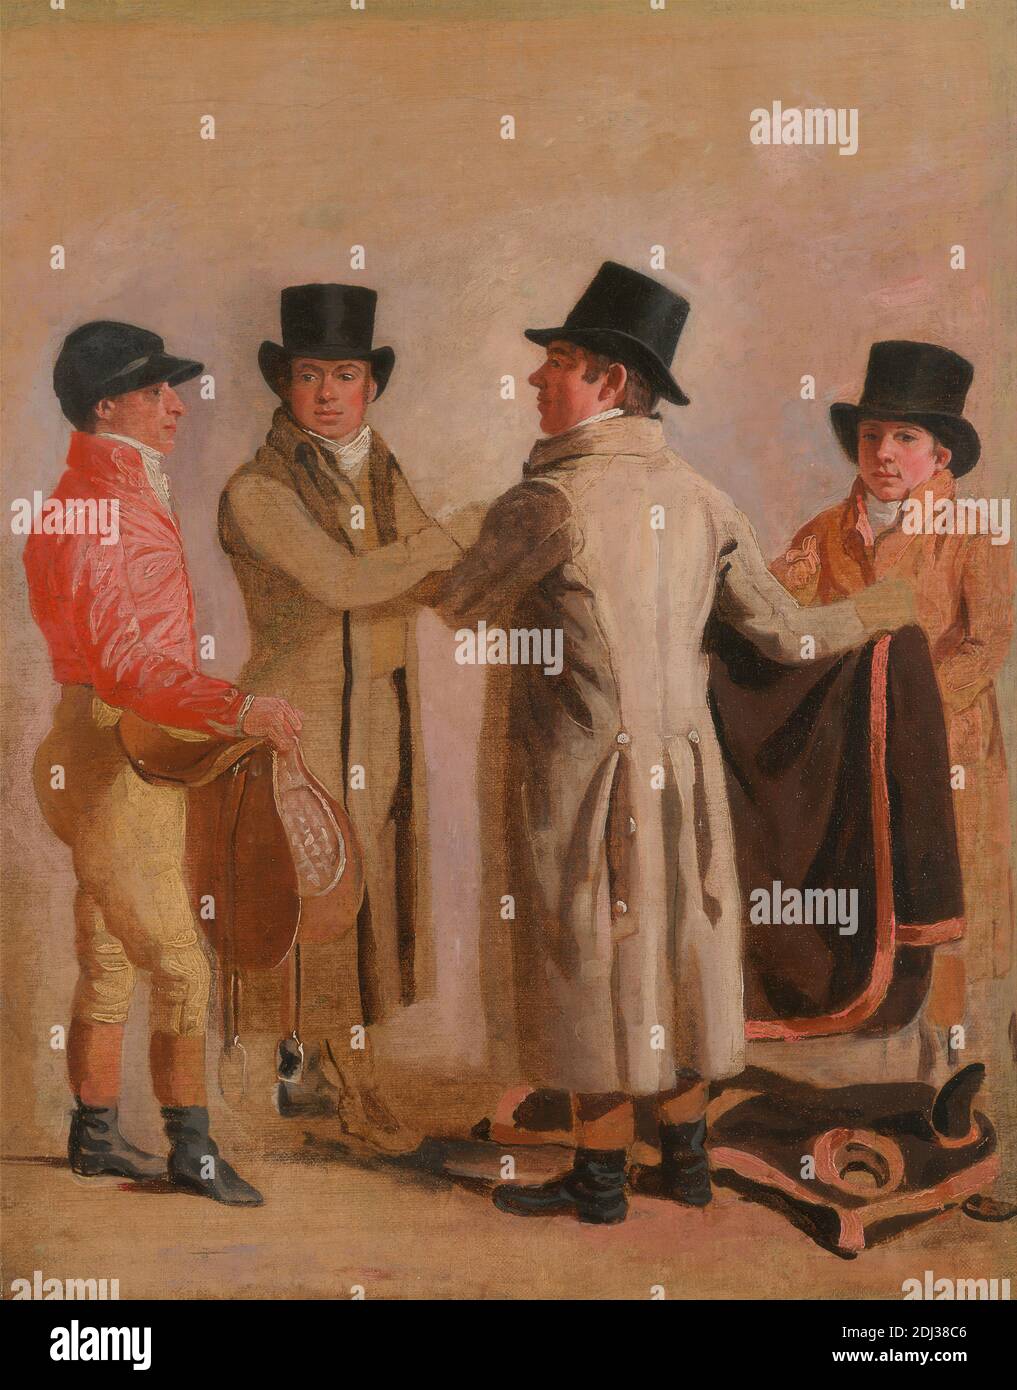 The Jockey Frank Buckle, the Owner-Breeder John Wastell, his Trainer Robert Robson, and a Stable-lad, Benjamin Marshall, 1768–1835, British, 1802, Oil on canvas, Support (PTG): 18 1/4 x 14 5/8 inches (46.4 x 37.1 cm), conversation piece, costume, groups, working, jockey, men, portrait Stock Photo